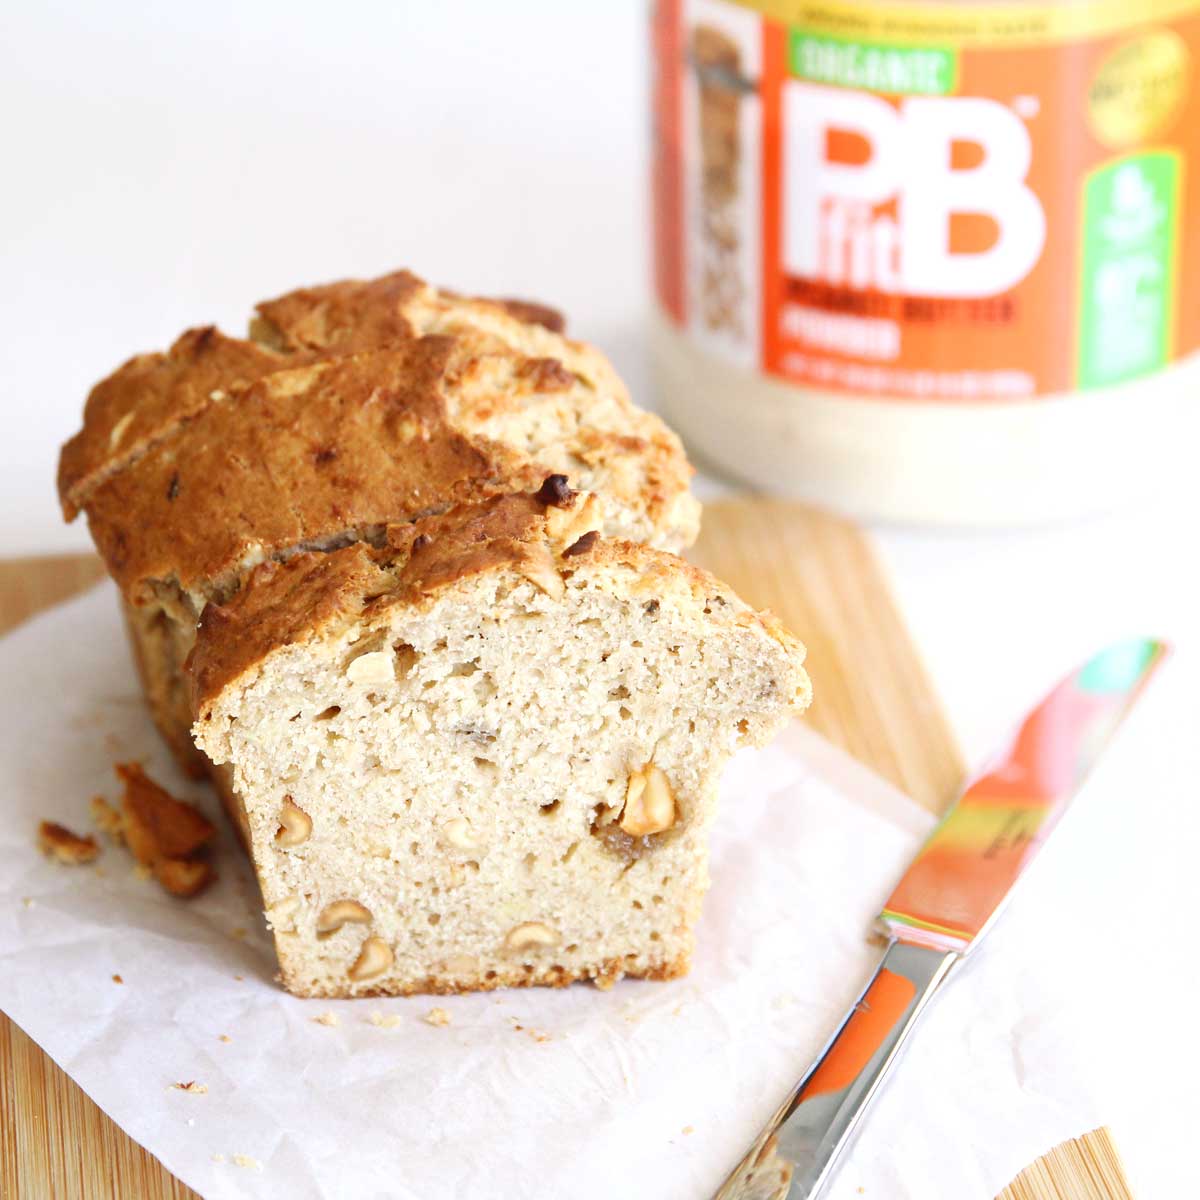 High Protein PB Fit Peanut Butter Banana Bread (Dairy Free, Egg Free Recipe) - Red Bean Mochi Cake